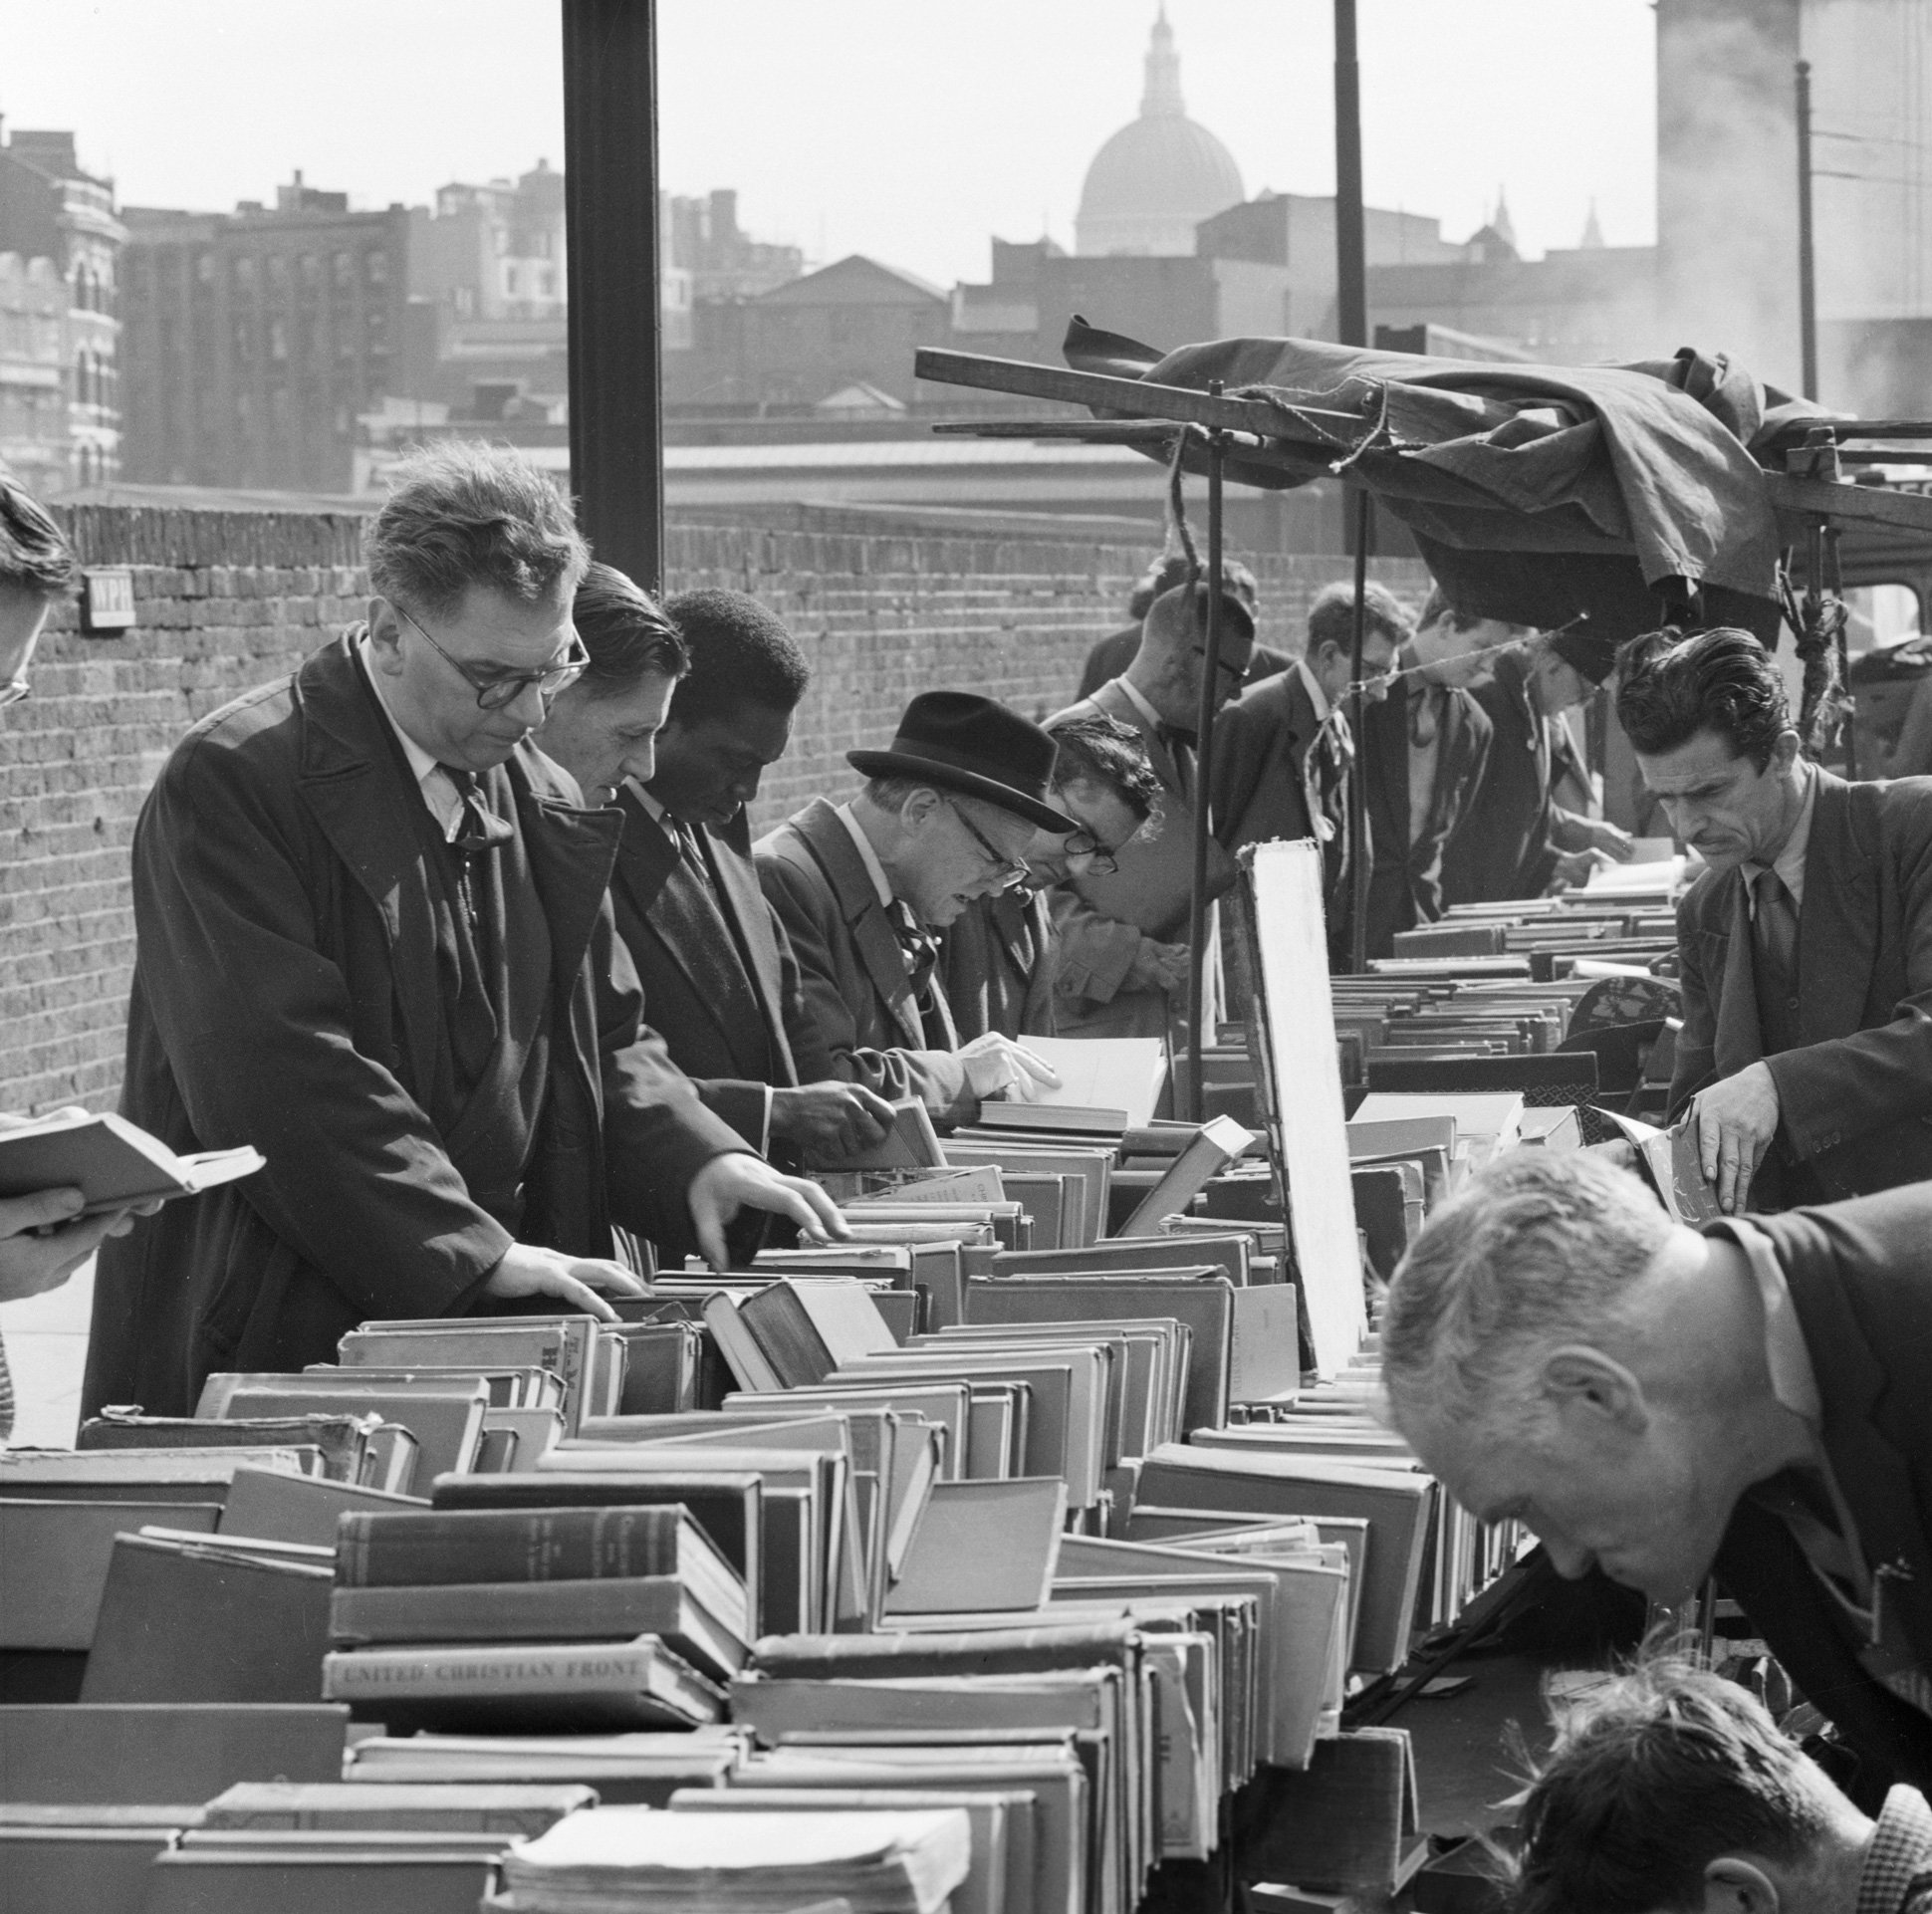 A black and white photo showing men in suits and overcoats browsing books on an open-air bookstall. The stall extends diagonally from the bottom-left. Behind a row of browsers is a brick wall. Amongst the background buildings, the dome of St Paul's Cathedral is visible.